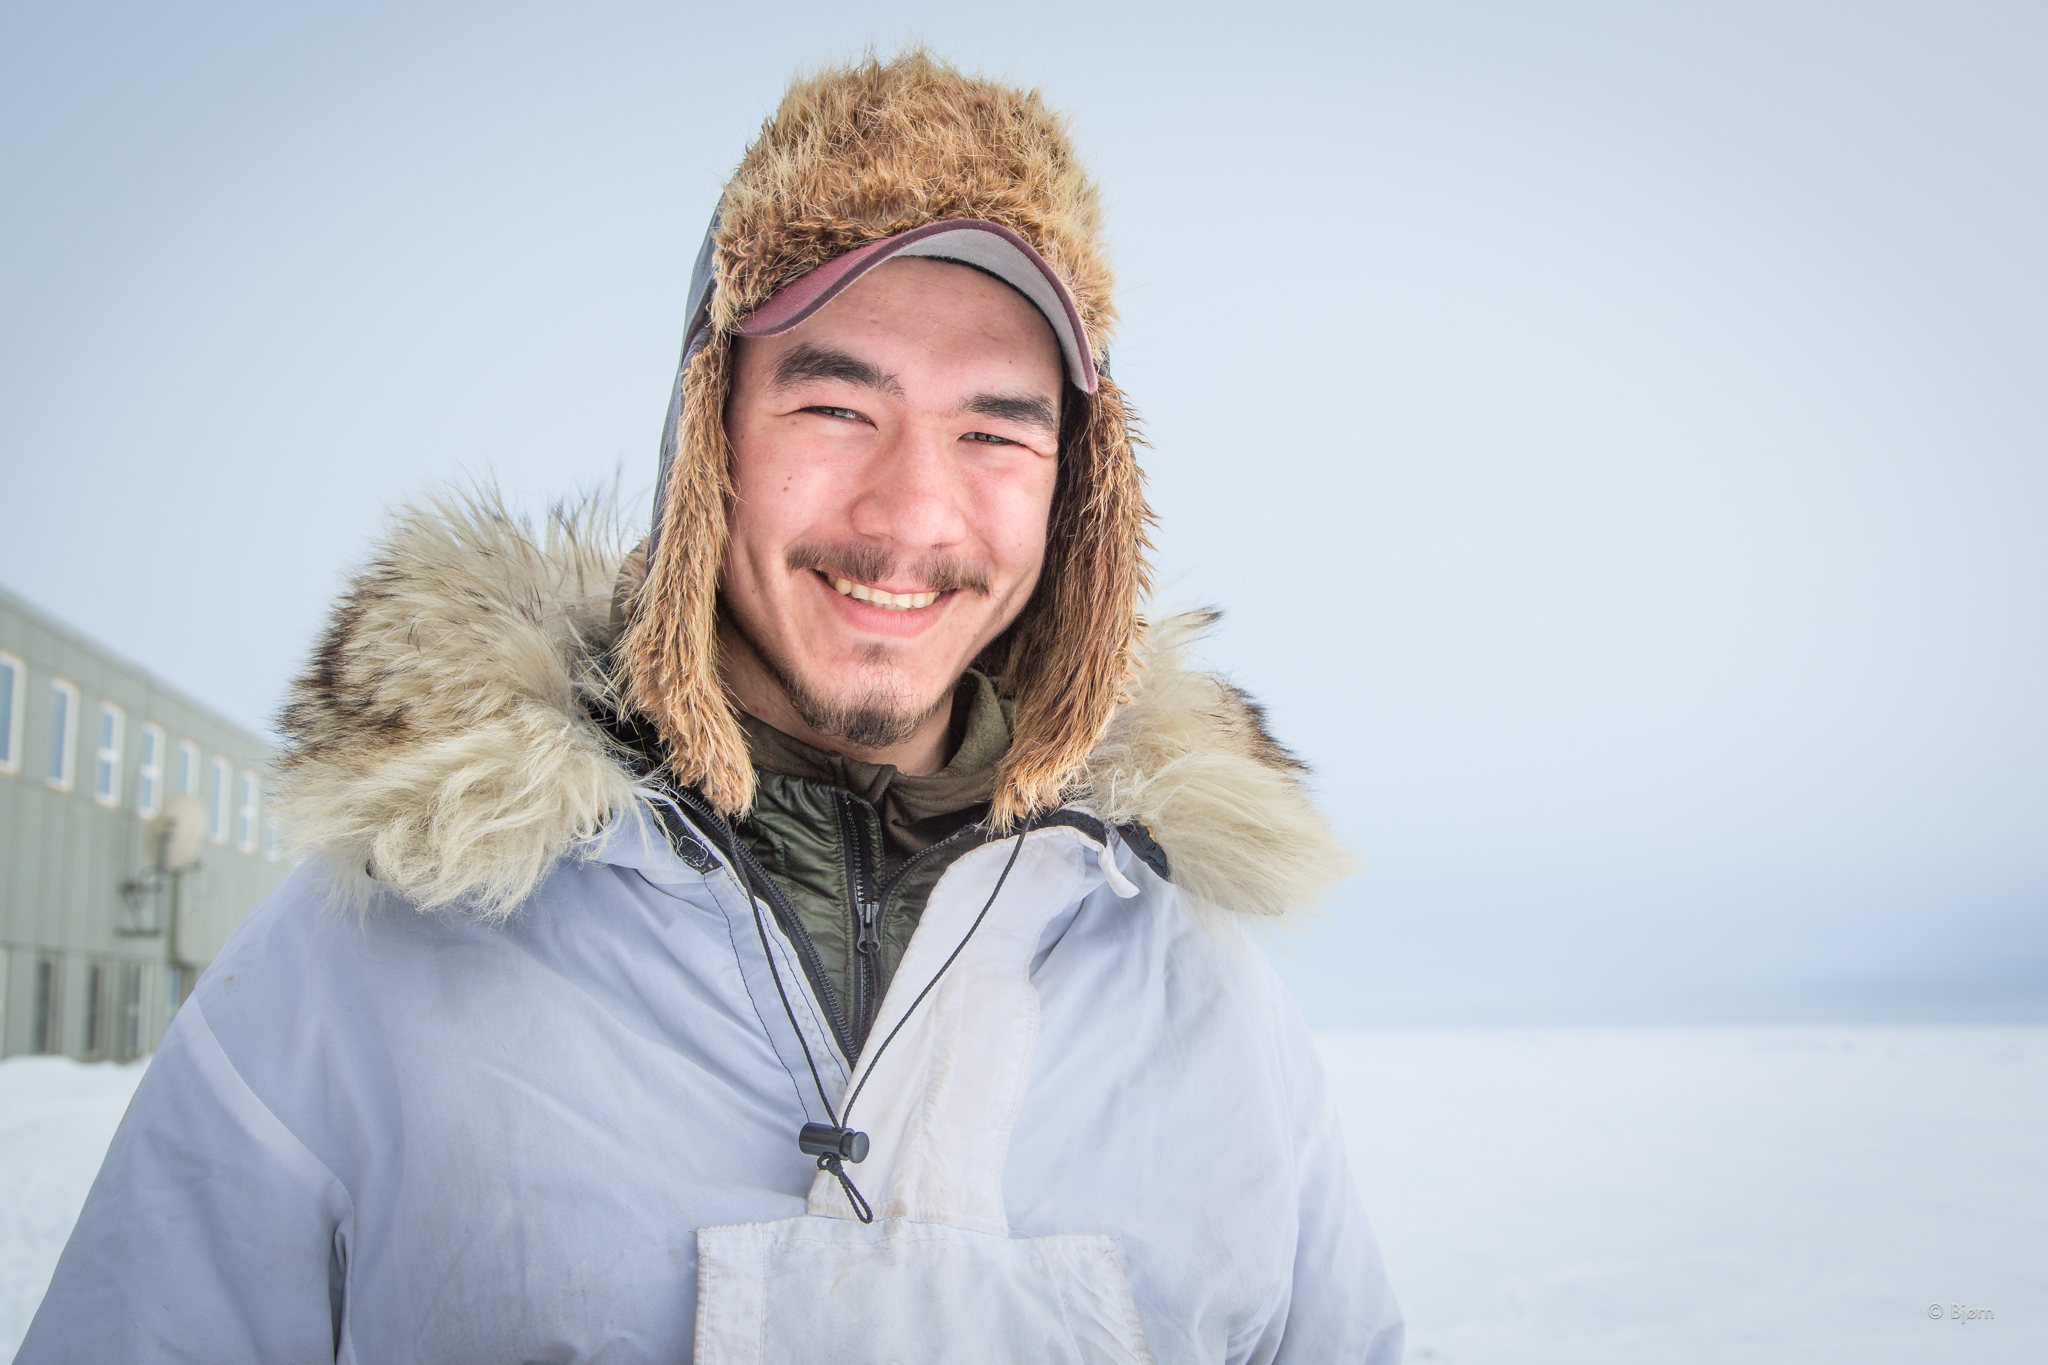  Kaktovik musher Vebjørn followed his father  Ketil Reitan &nbsp;to Nome on snowmachine. Kim and I met Vebjørn and Ketil in 2015 in White Mountain village. They had finished the Iditarod and were mushing home to Kaktovik. They are attempting to mush 